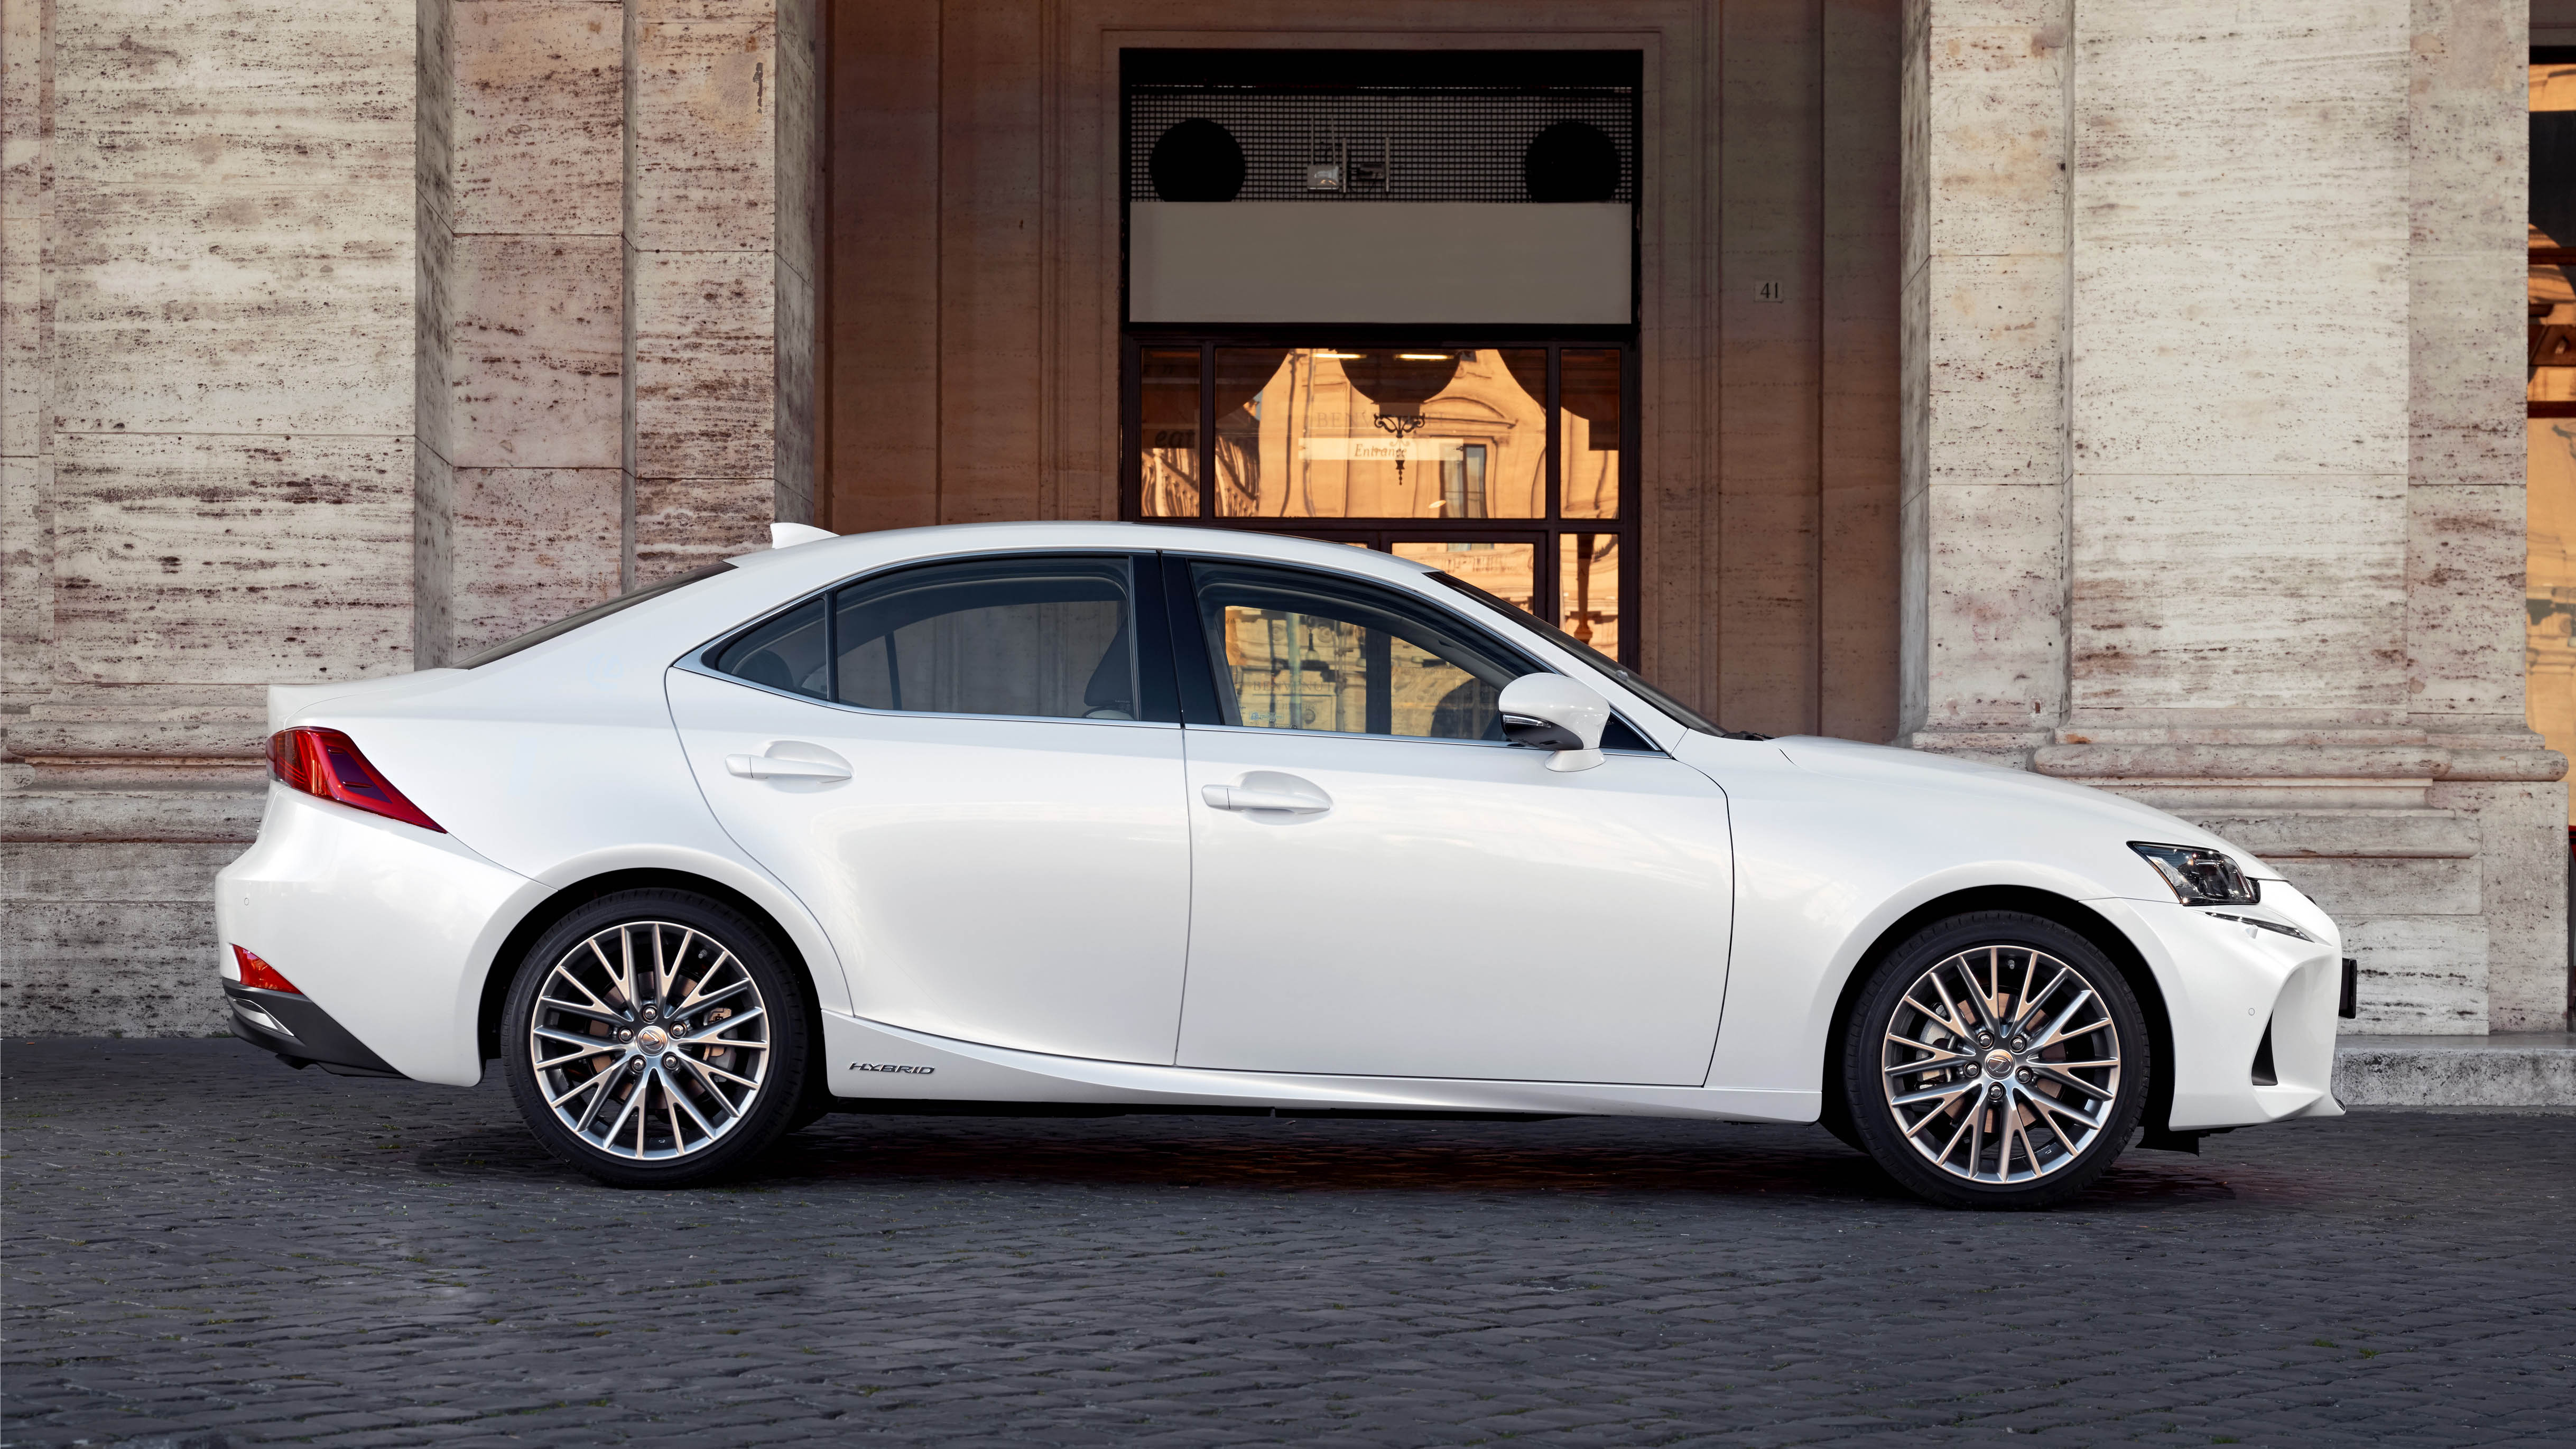 Lexus IS 300h exterior restyling